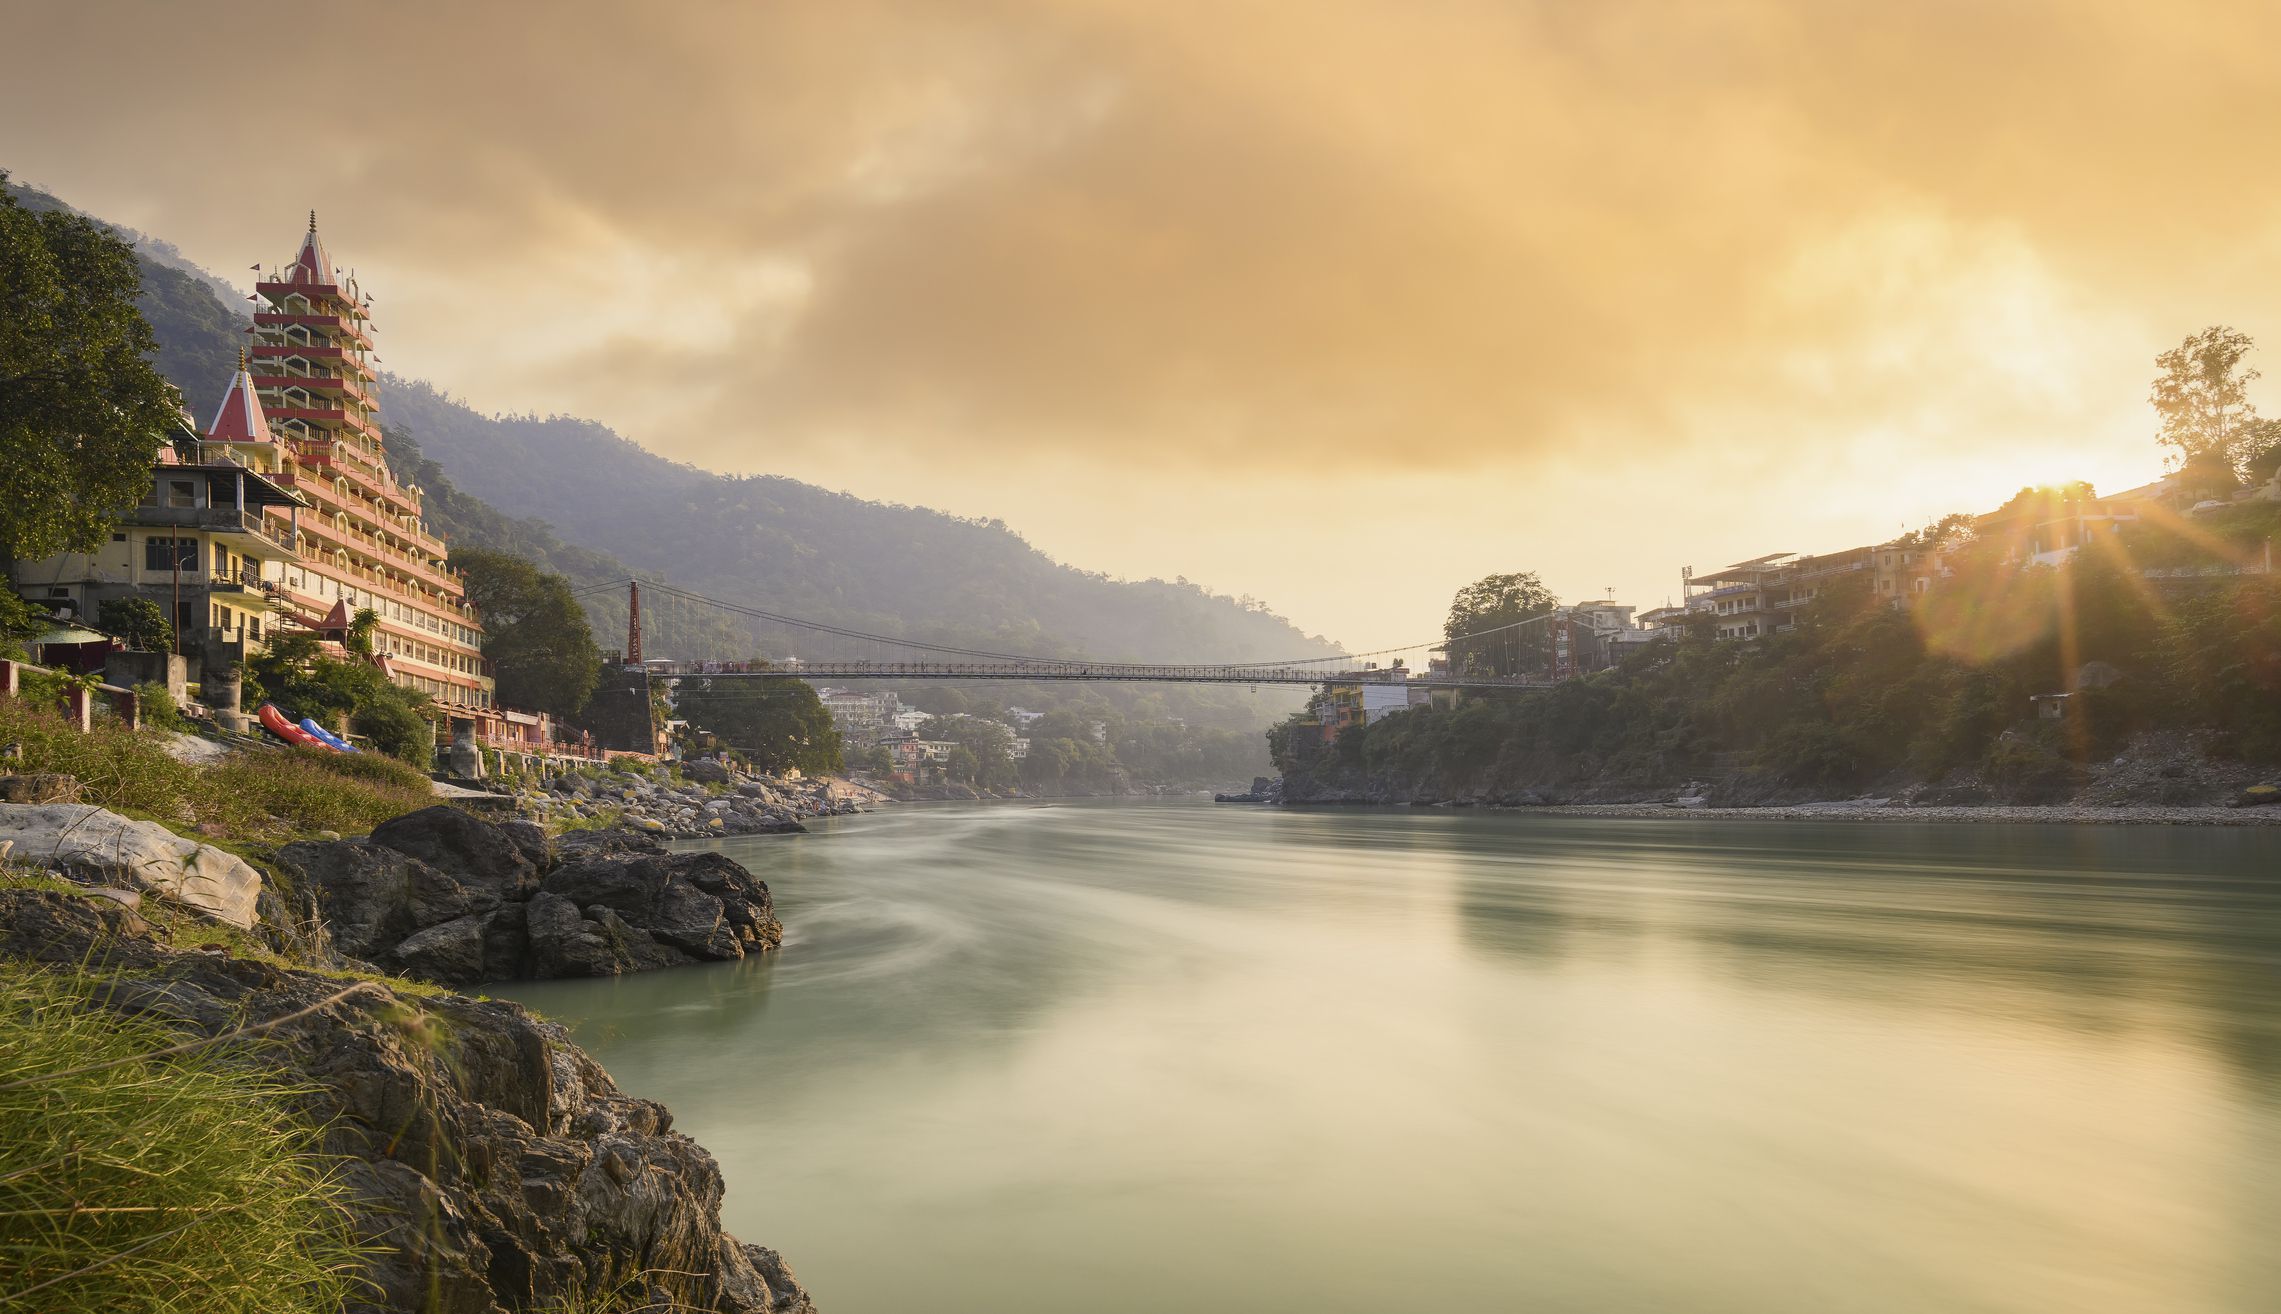 <p>Rishikesh is known as the Yoga Capital of the world. Millions of people flock to this quaint town at the foot of the Himalayan foothills every year.</p><p>Rishikesh is a yoga base camp for sadhus – holy men who live in ashrams on the banks of Hinduism’s most sacred river, the Ganga. They have mastered the art of meditation over the centuries and live a peaceful life with few possessions.</p><p><em>“The Ganga River is considered the holiest river because the Hindus believe it is the body of the Goddess Ganga, a deity who came to earth to purify souls. You can swim in the river, and many Hindus believe life isn’t complete without bathing in it at least once.”</em> – Nick Kembel from <a href="https://funworldfacts.com/">Fun World Facts</a>.</p><p>If you do decide to go to Rishikesh, you can stay in either Ram Jhula or Lakshman Jhula, both of which have plenty of affordable hotels and yoga centers. It’s a truly peaceful place with friendly locals, cheap food, and plenty to do.</p><p>If you’re looking for adventure on your spiritual retreat, you can go white water rafting, hike to waterfalls, and even cliff jumping. But if you want something calmer, you can find a yoga teacher and practice some quiet meditation instead.</p>